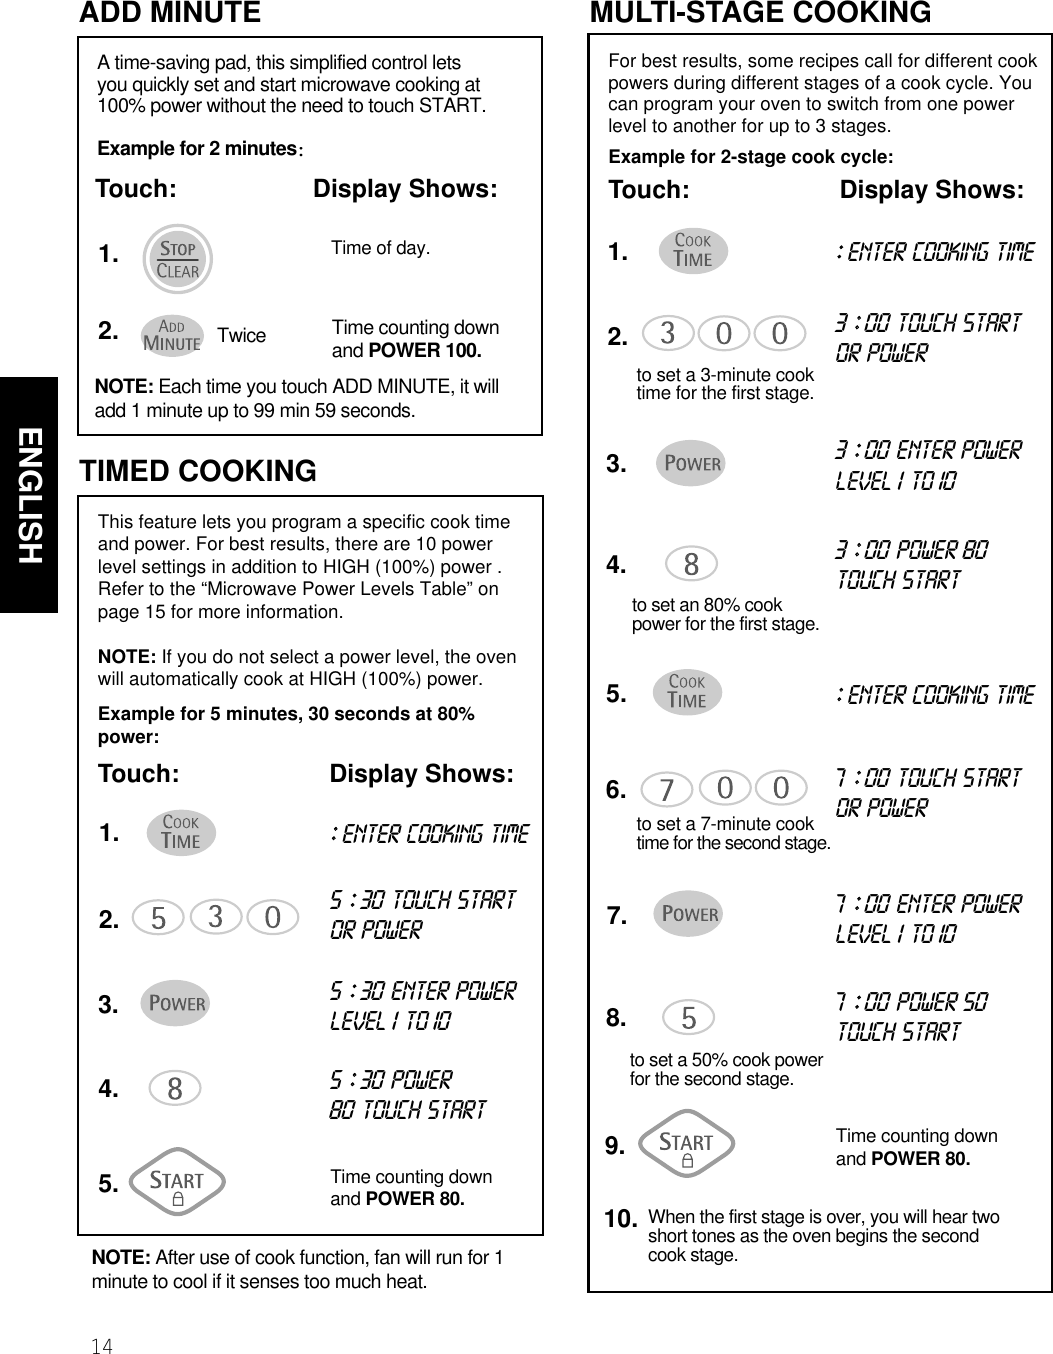 14ENGLISHUSING YOUR MICROWAVE OVEN  TIMED COOKING1.2.5.3.4.This feature lets you program a specific cook timeand power. For best results, there are 10 powerlevel settings in addition to HIGH (100%) power .Refer to the “Microwave Power Levels Table” onpage 15 for more information.NOTE: If you do not select a power level, the ovenwill automatically cook at HIGH (100%) power.Example for 5 minutes, 30 seconds at 80%power:Touch: Display Shows:::ENTER COOKING TIME5 ::30TOUCH STARTOR POWER5 ::30ENTER POWER LEVEL1 TO 105 ::30POWER80TOUCH STARTTime counting downand POWER 80.For best results, some recipes call for different cookpowers during different stages of a cook cycle. Youcan program your oven to switch from one powerlevel to another for up to 3 stages.Example for 2-stage cook cycle:Touch: Display Shows:MULTI-STAGE COOKING1.2.5.3.4.6.to set a 7-minute cook time for the second stage.to set a 3-minute cook time for the first stage.7.9.::ENTER COOKING TIME::ENTER COOKING TIME3 ::00TOUCH STARTOR POWER7 ::00TOUCH STARTOR POWER3 ::00 ENTER POWERLEVEL 1 TO107 ::00ENTER POWERLEVEL 1 TO103 ::00 POWER 80TOUCH START8.to set a 50% cook powerfor the second stage.to set an 80% cookpower for the first stage.7 ::00 POWER 50TOUCH STARTWhen the first stage is over, you will hear twoshort tones as the oven begins the secondcook stage.10.Time counting downand POWER 80.ADD MINUTE1.2.A time-saving pad, this simplified control letsyou quickly set and start microwave cooking at100% power without the need to touch START.Example for 2 minutesTouch: Display Shows:NOTE: Each time you touch ADD MINUTE, it willadd 1 minute up to 99 min 59 seconds.Twice Time counting downand POWER 100.Time of day.NOTE: After use of cook function, fan will run for 1minute to cool if it senses too much heat.